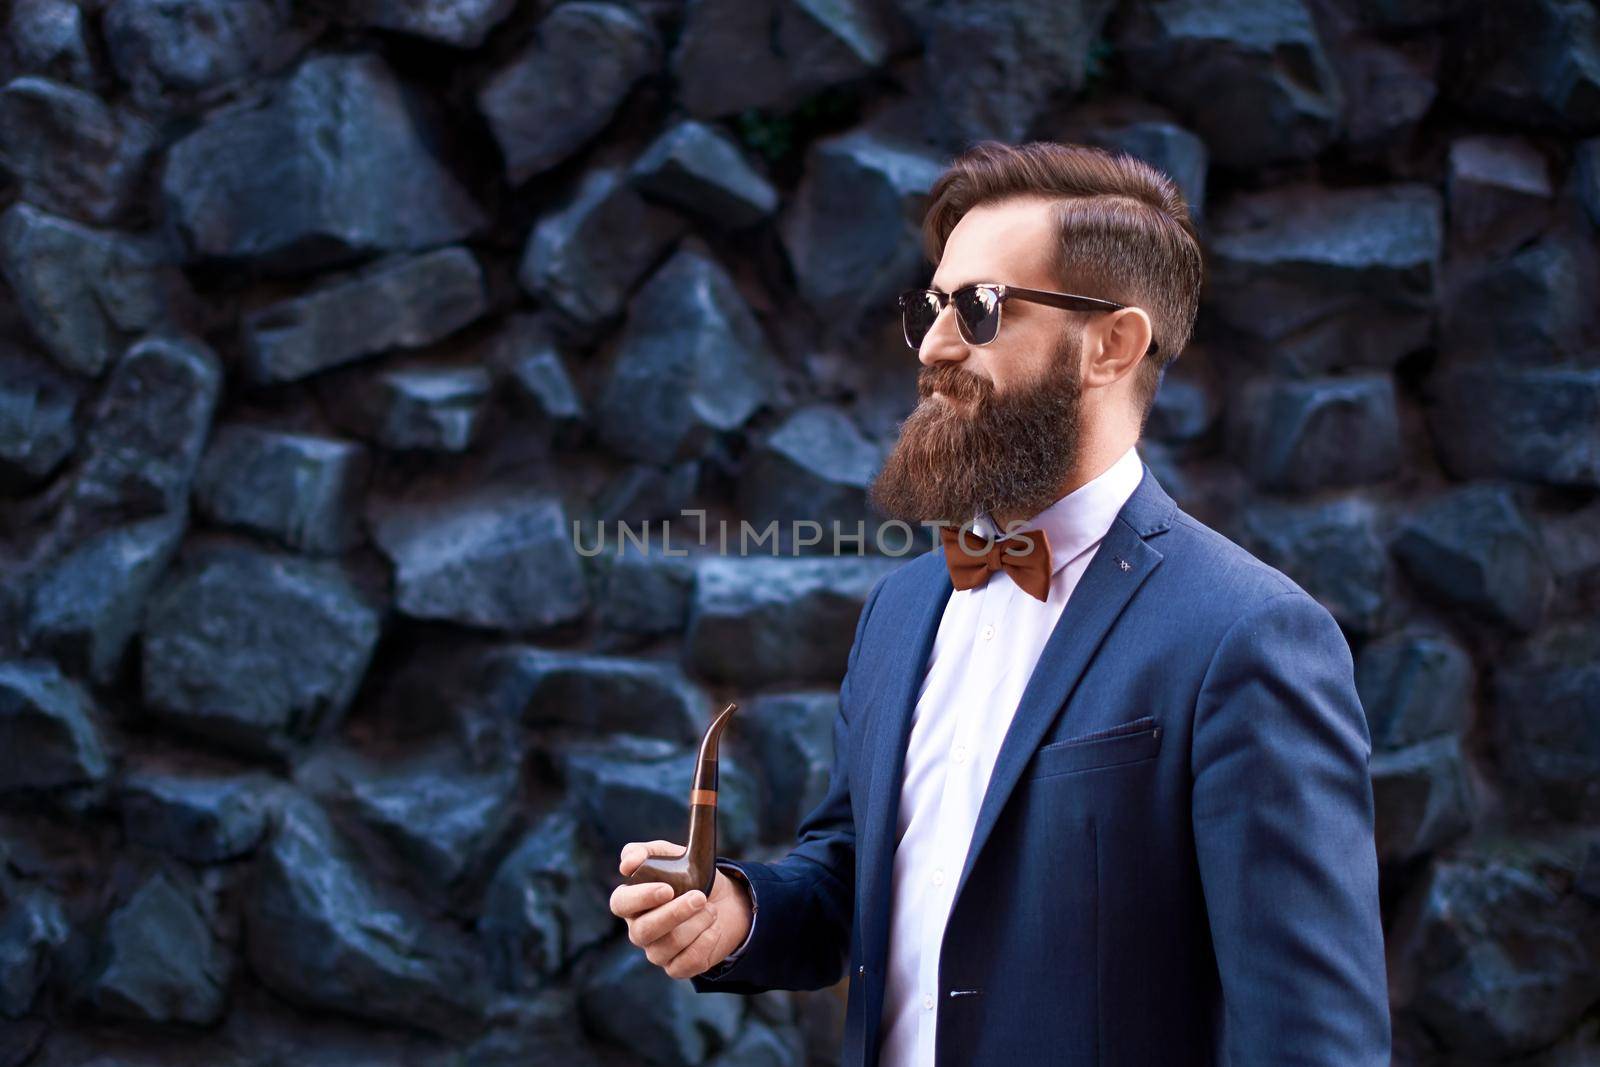 Stylish man with beard wearing a jacket, shirt and bow tie smoking a pipe